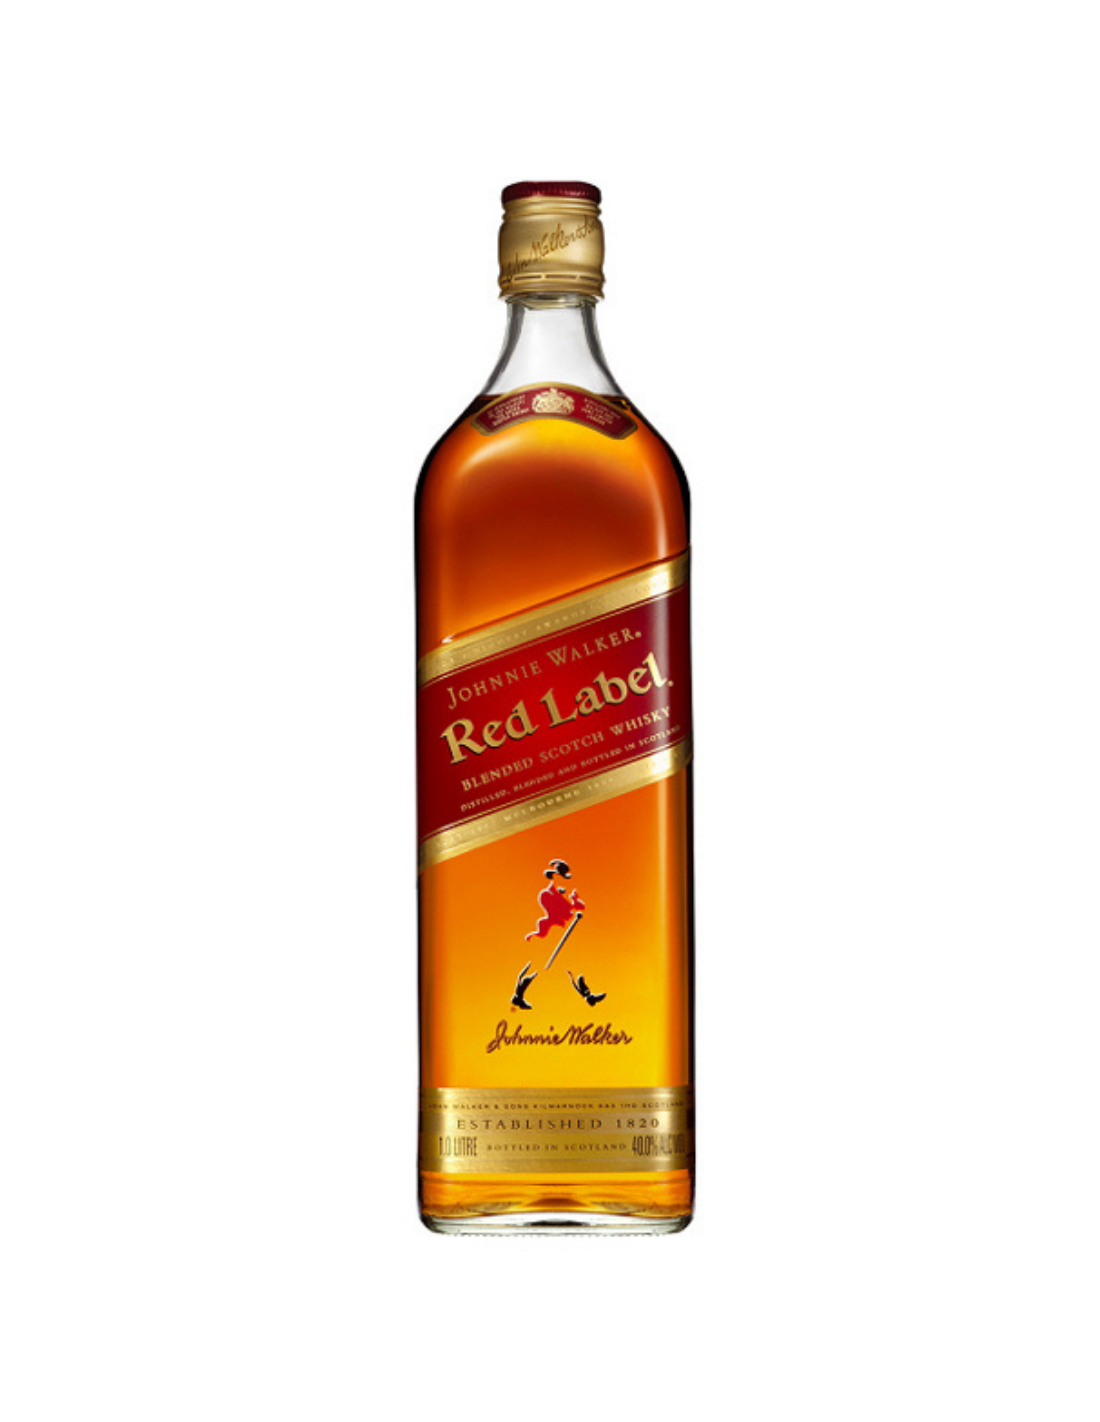 Whisky Johnnie Walker Red Label, 0.7L, 40% alc., Scotia alcooldiscount.ro